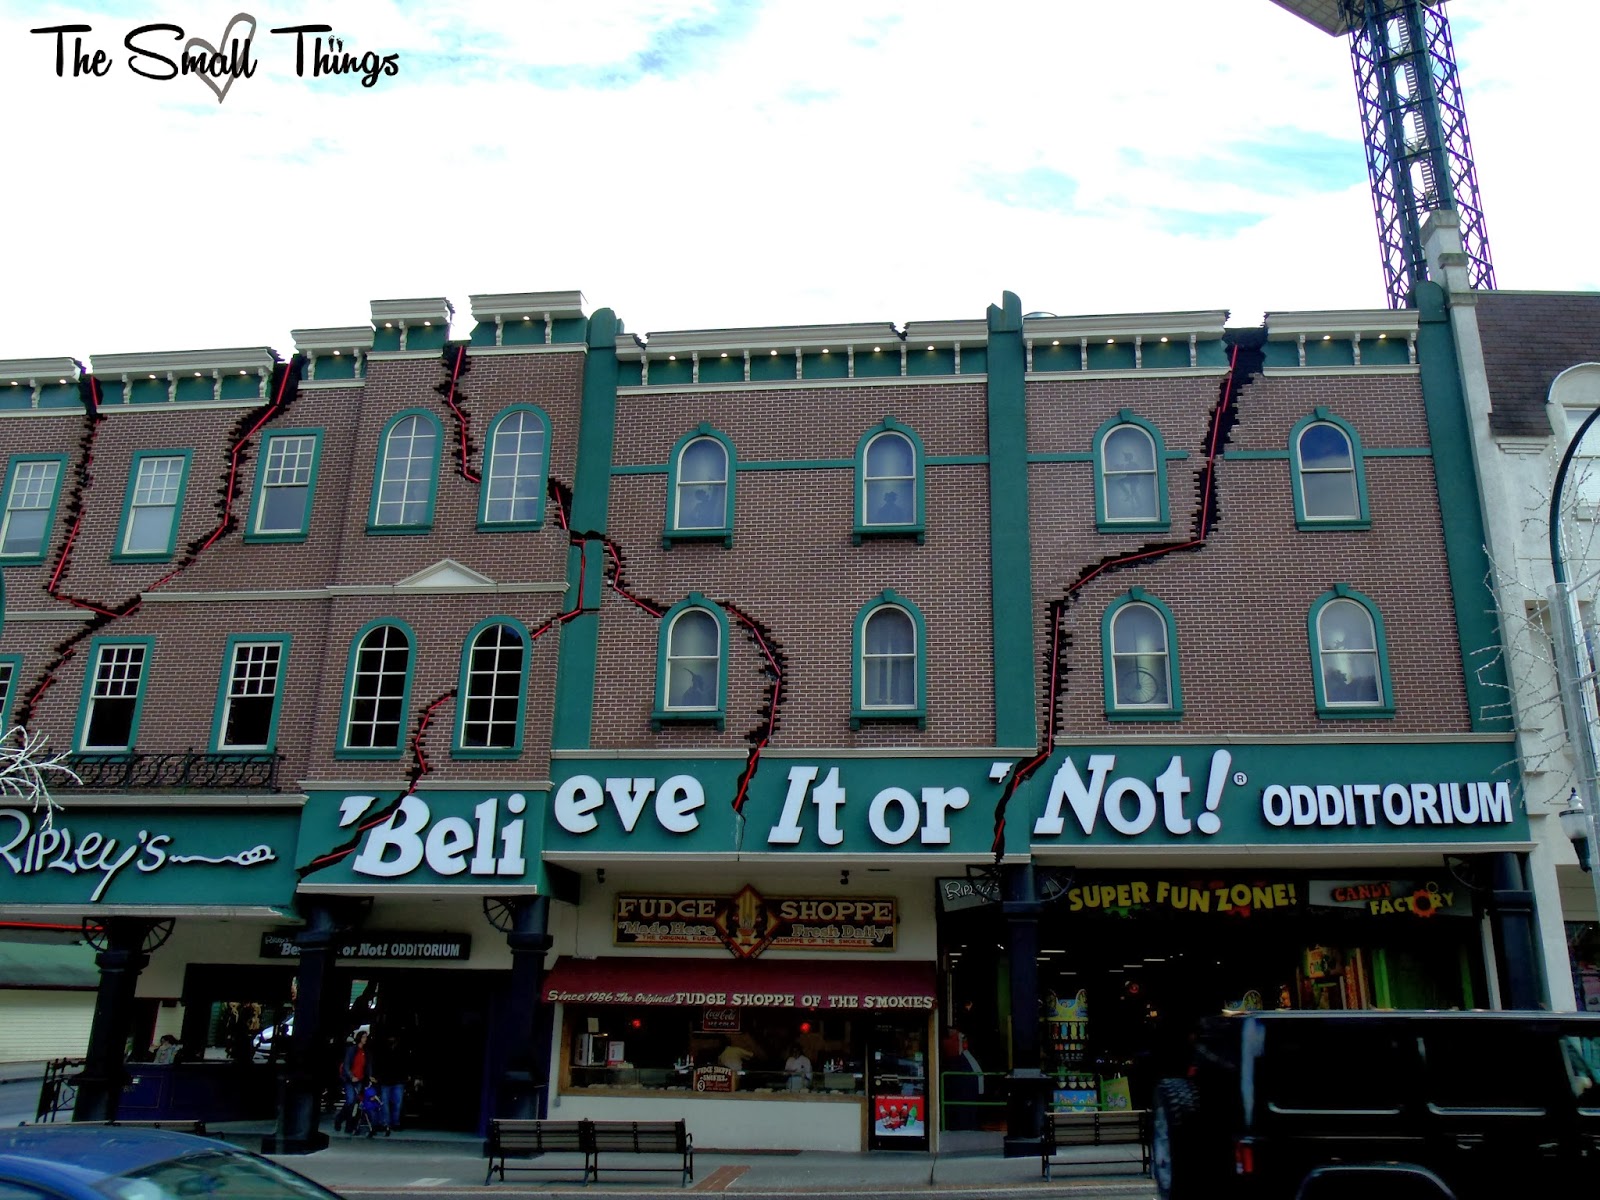 Ripley's Believe It Or Not! Odditorium Review